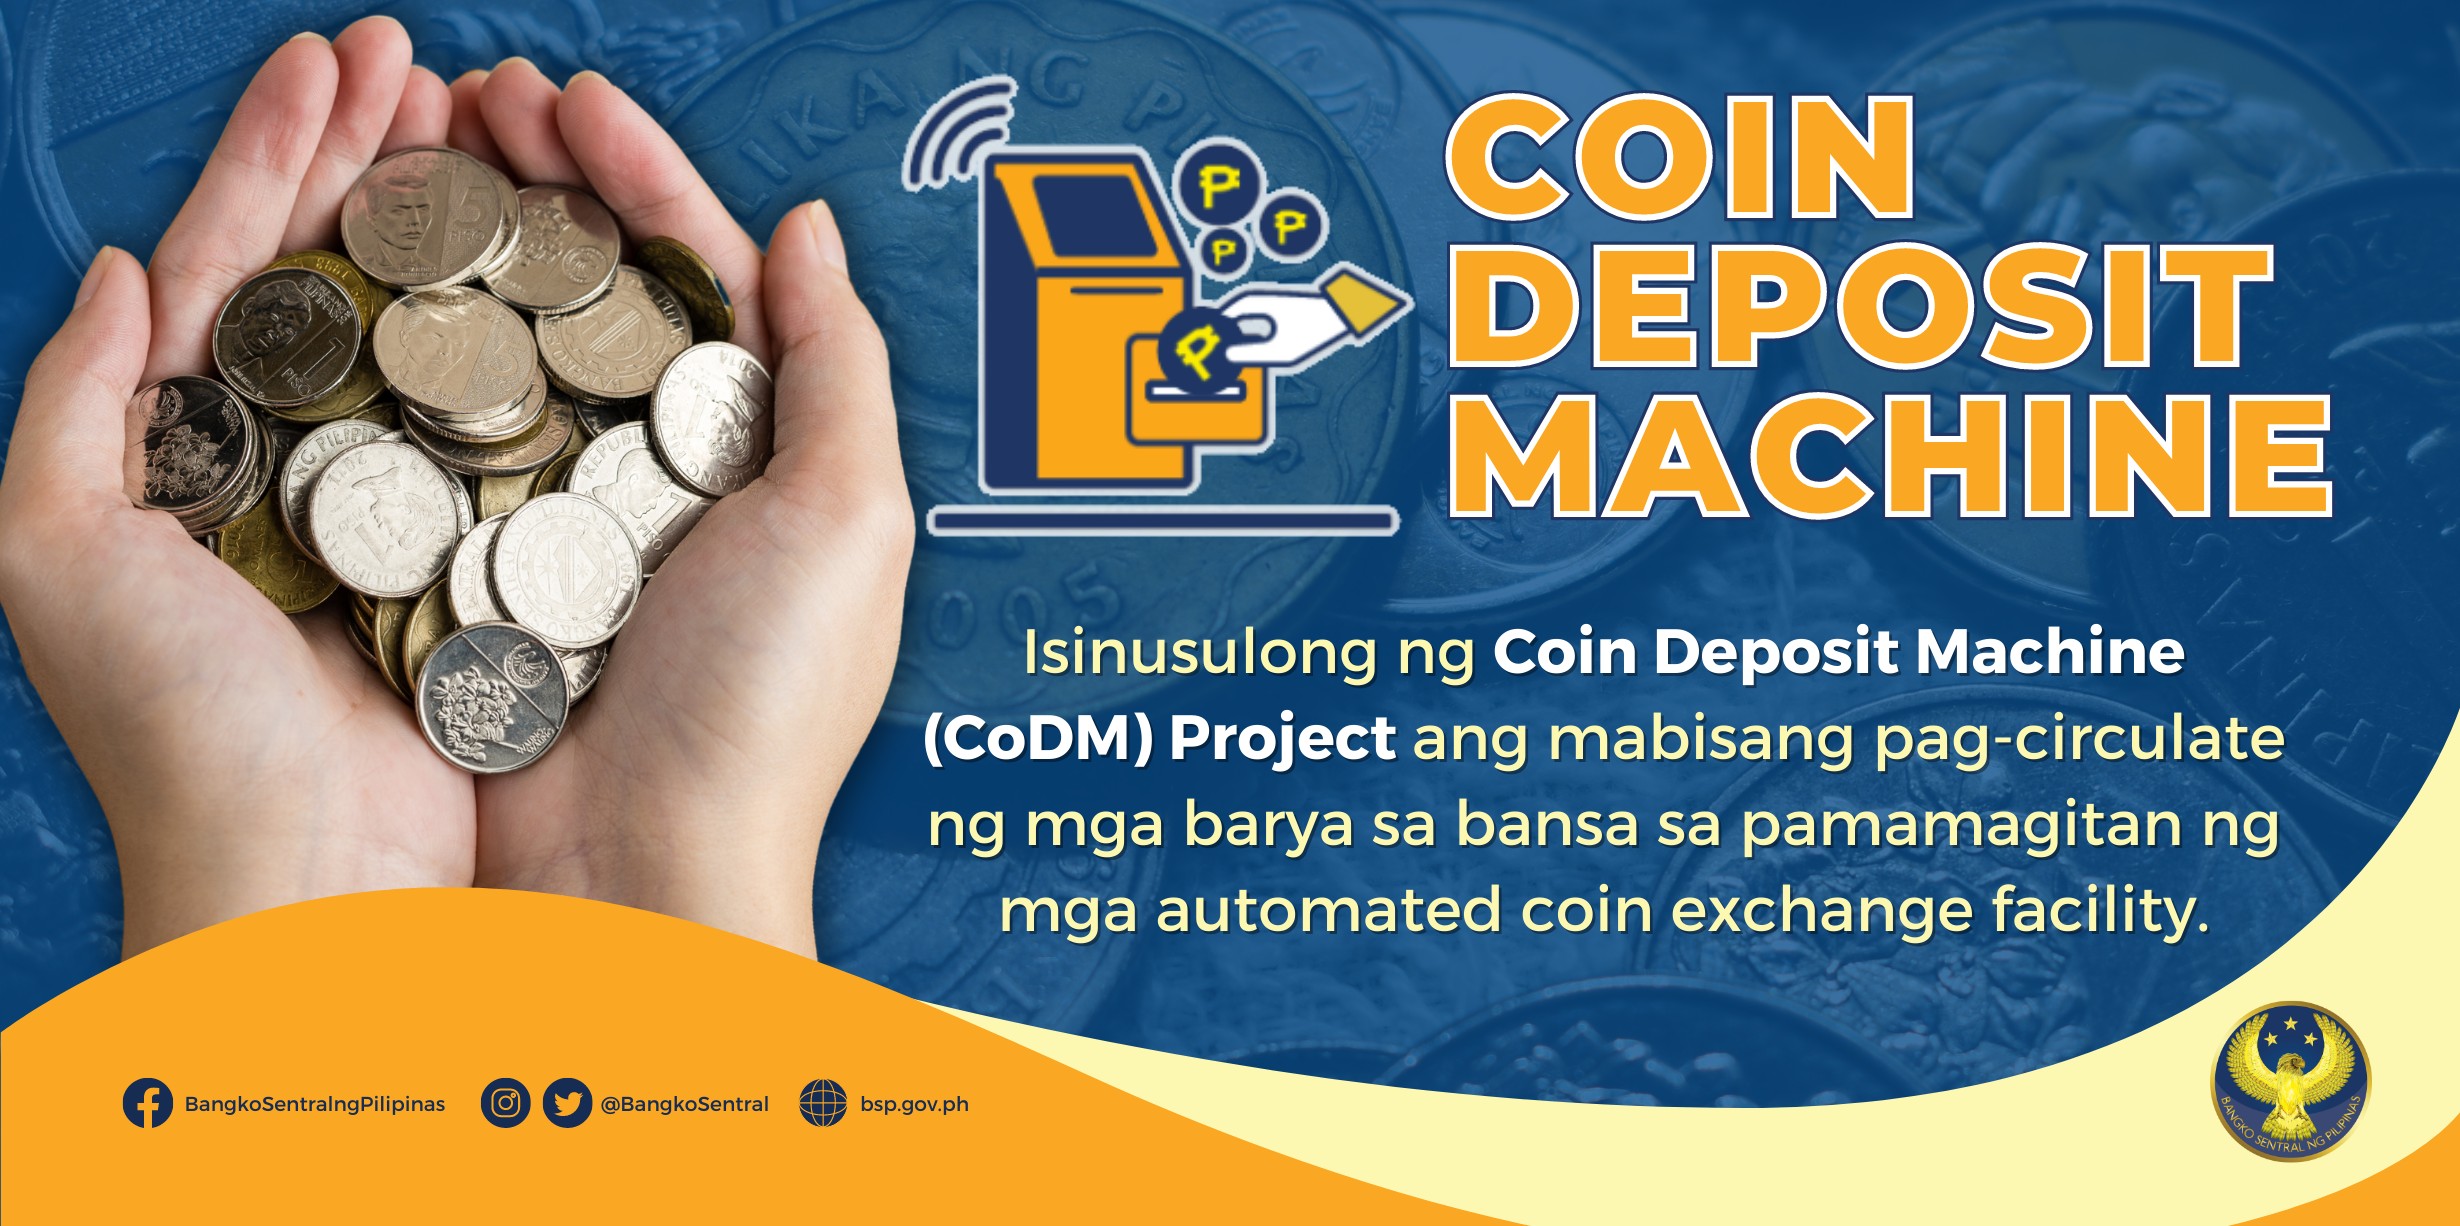 how to deposit coins in bank philippines - coin deposit machine